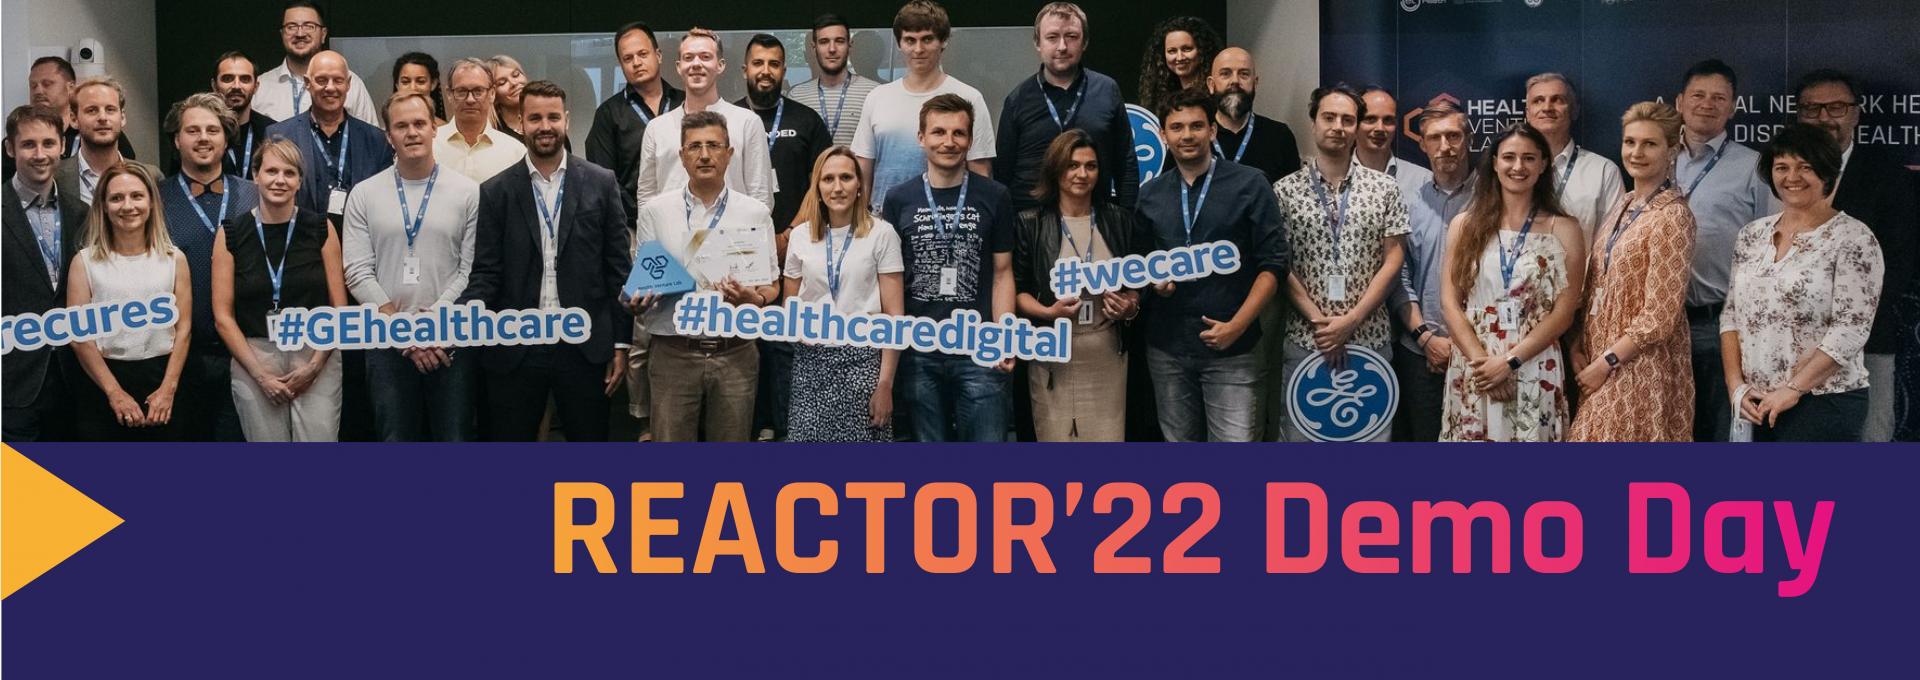 Greasing the MedTech wheels with novel European startups gaining ground during the Reactor’22 Demo Day!